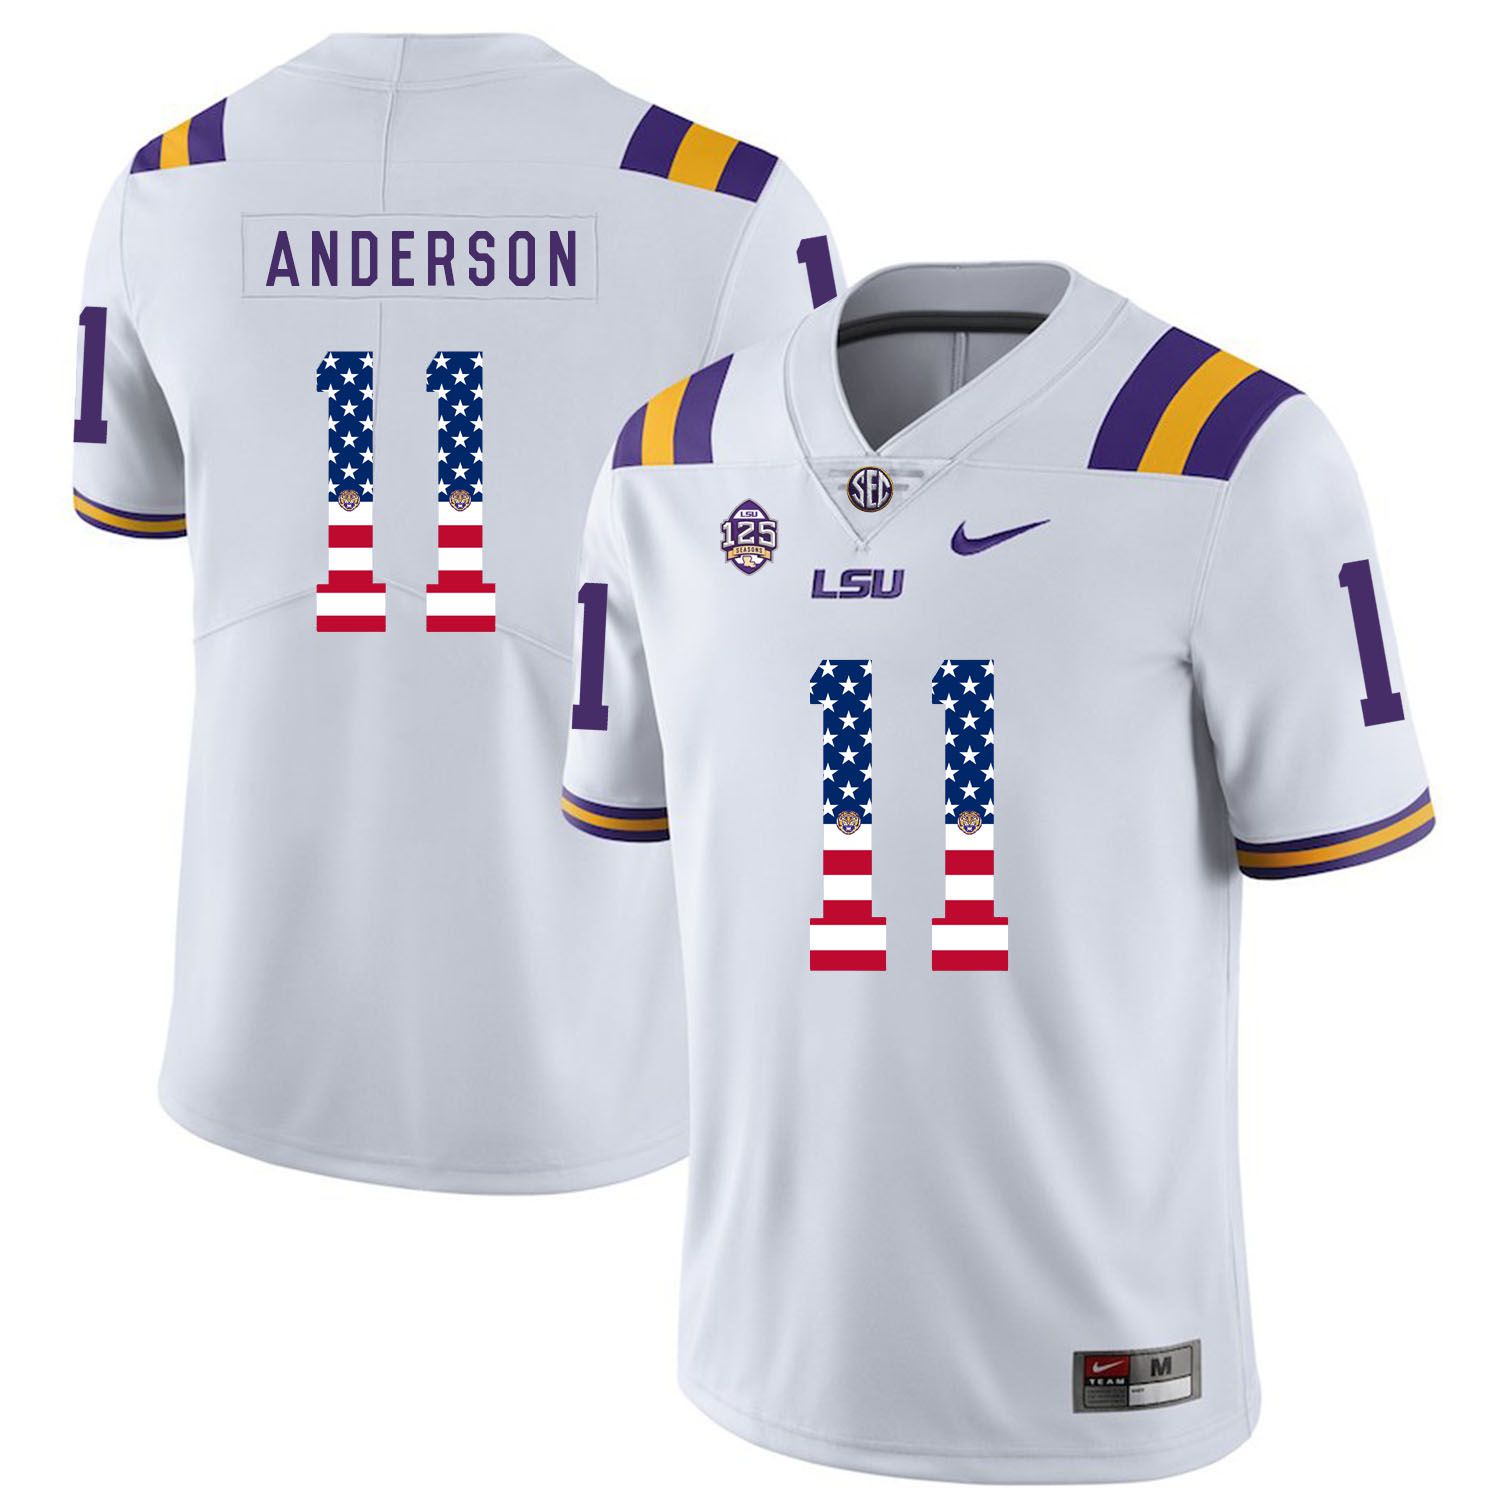 Men LSU Tigers 11 Anderson White Flag Customized NCAA Jerseys